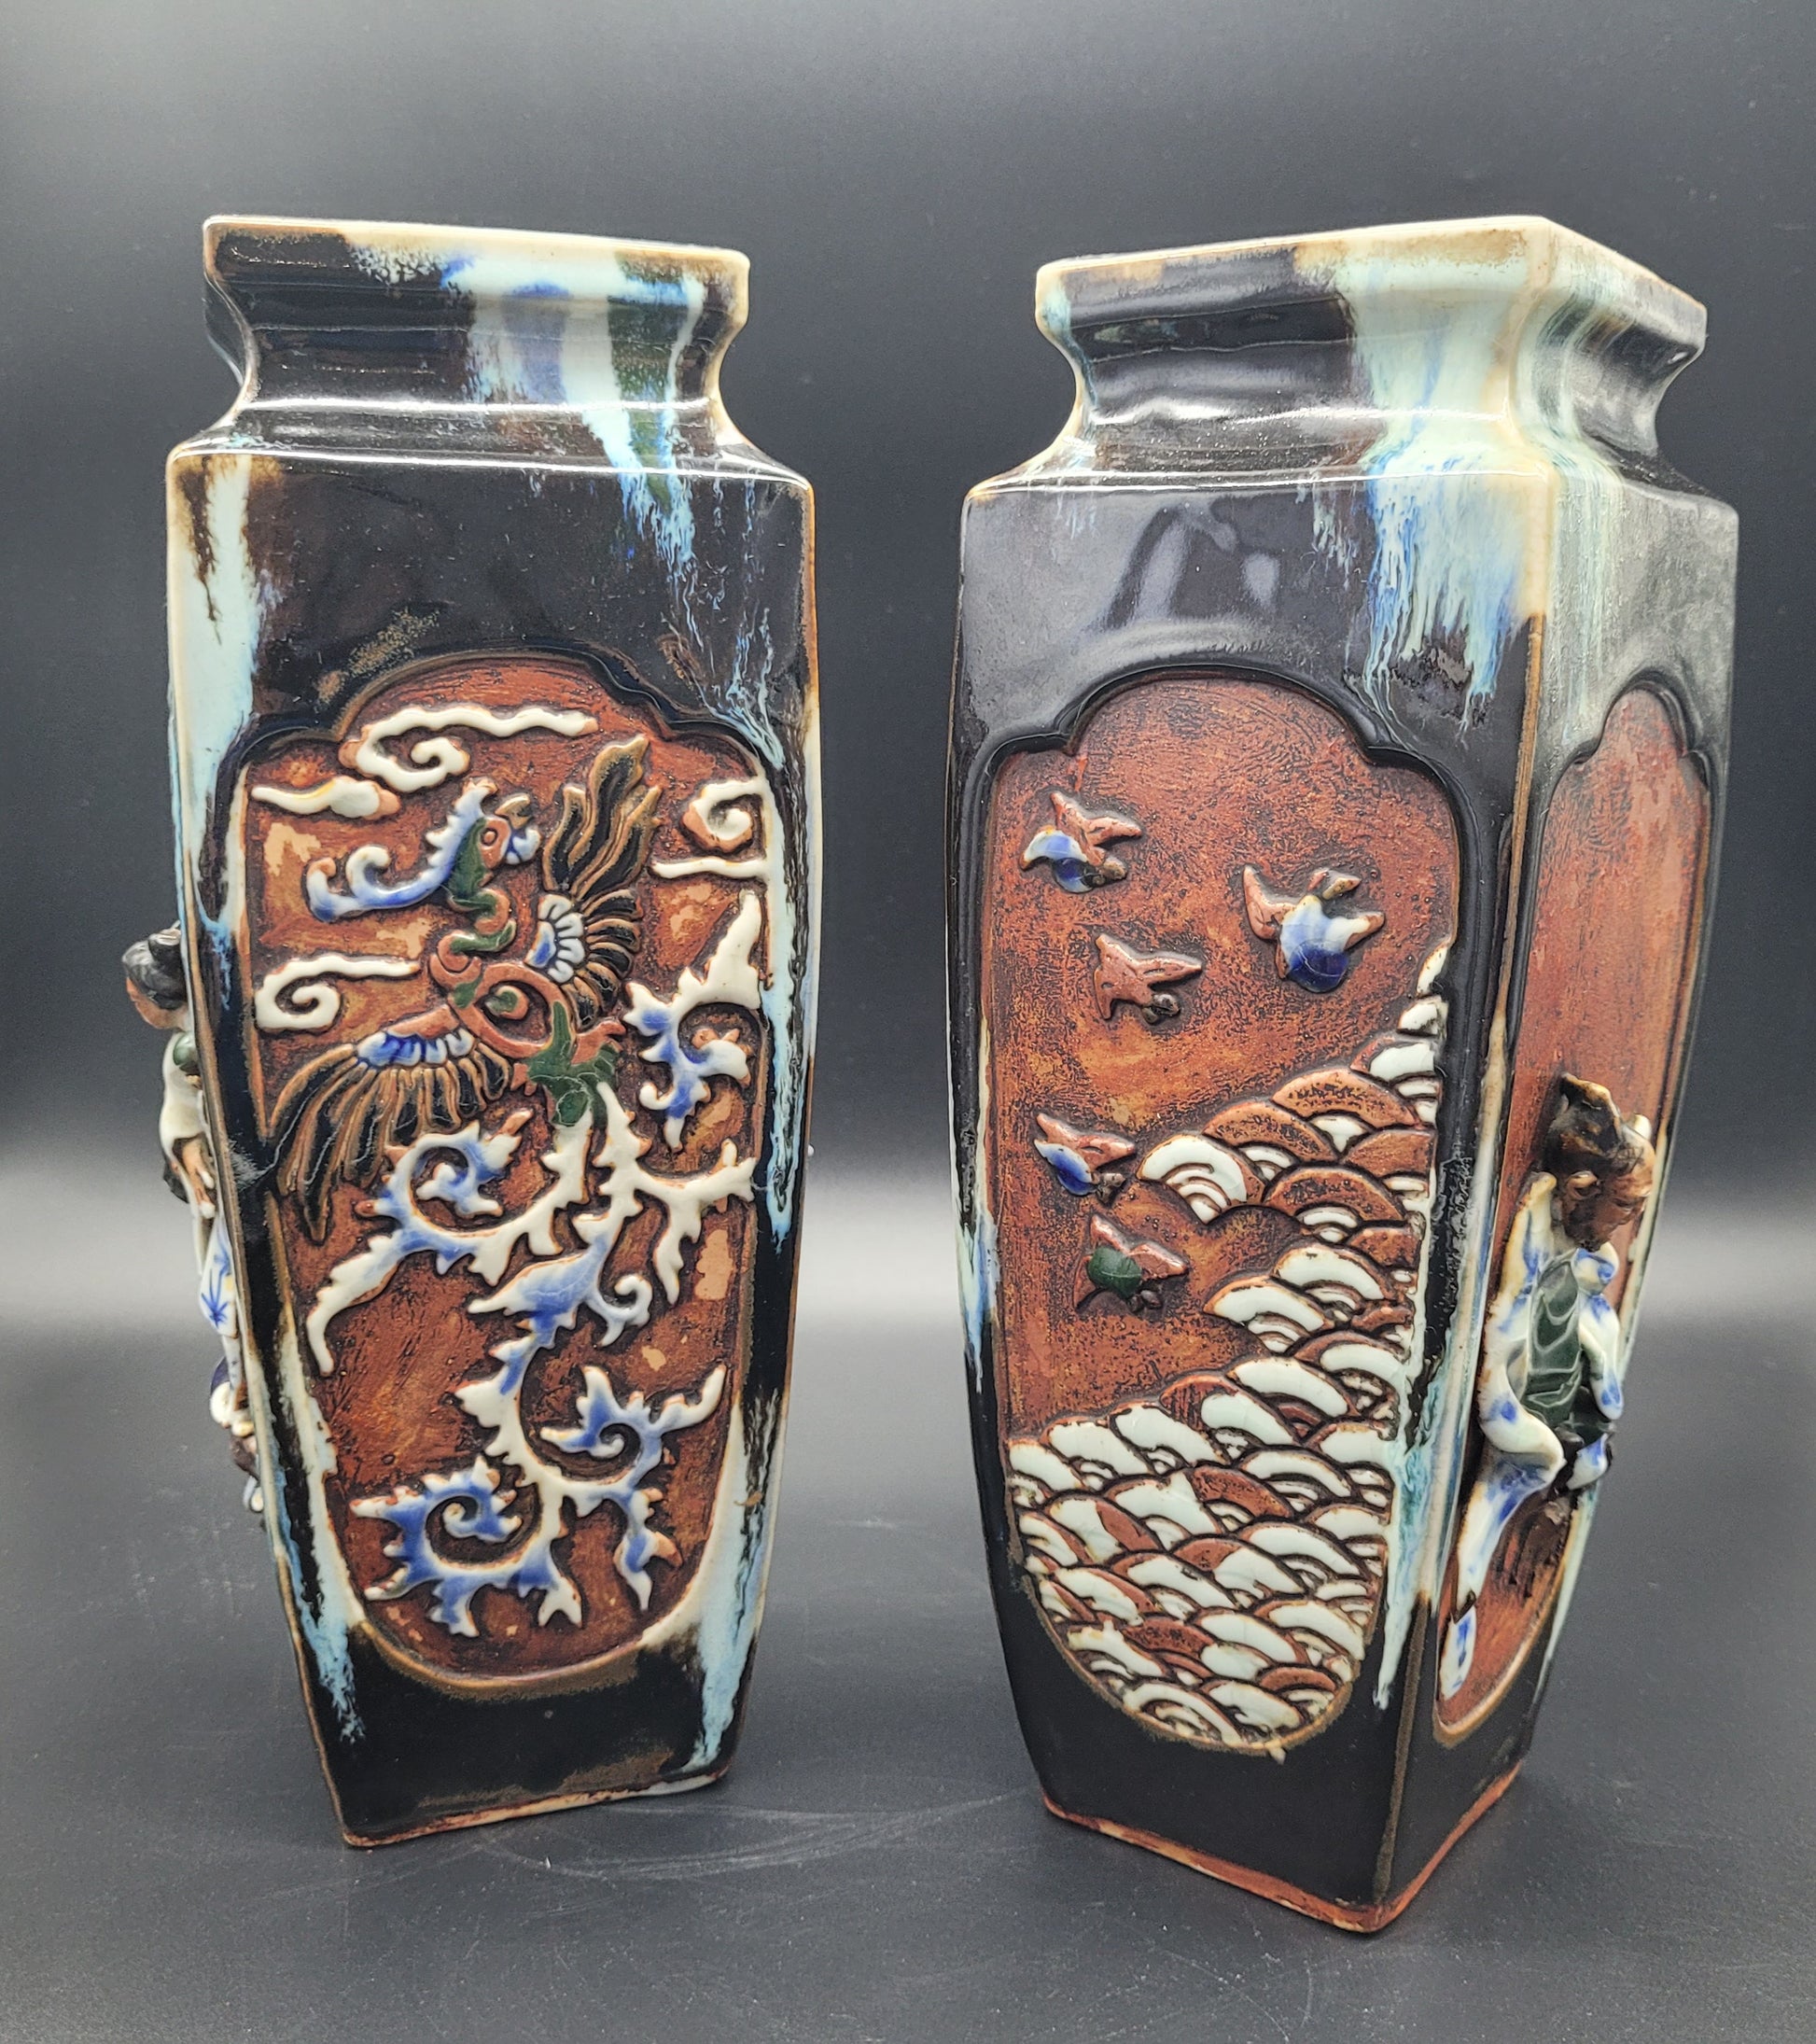 Highly Detailed Japanese Meiji Sumida Gawa Pottery Vases Signed By The Artist   Late 19th Century Meiji period  ANTIQUES UK